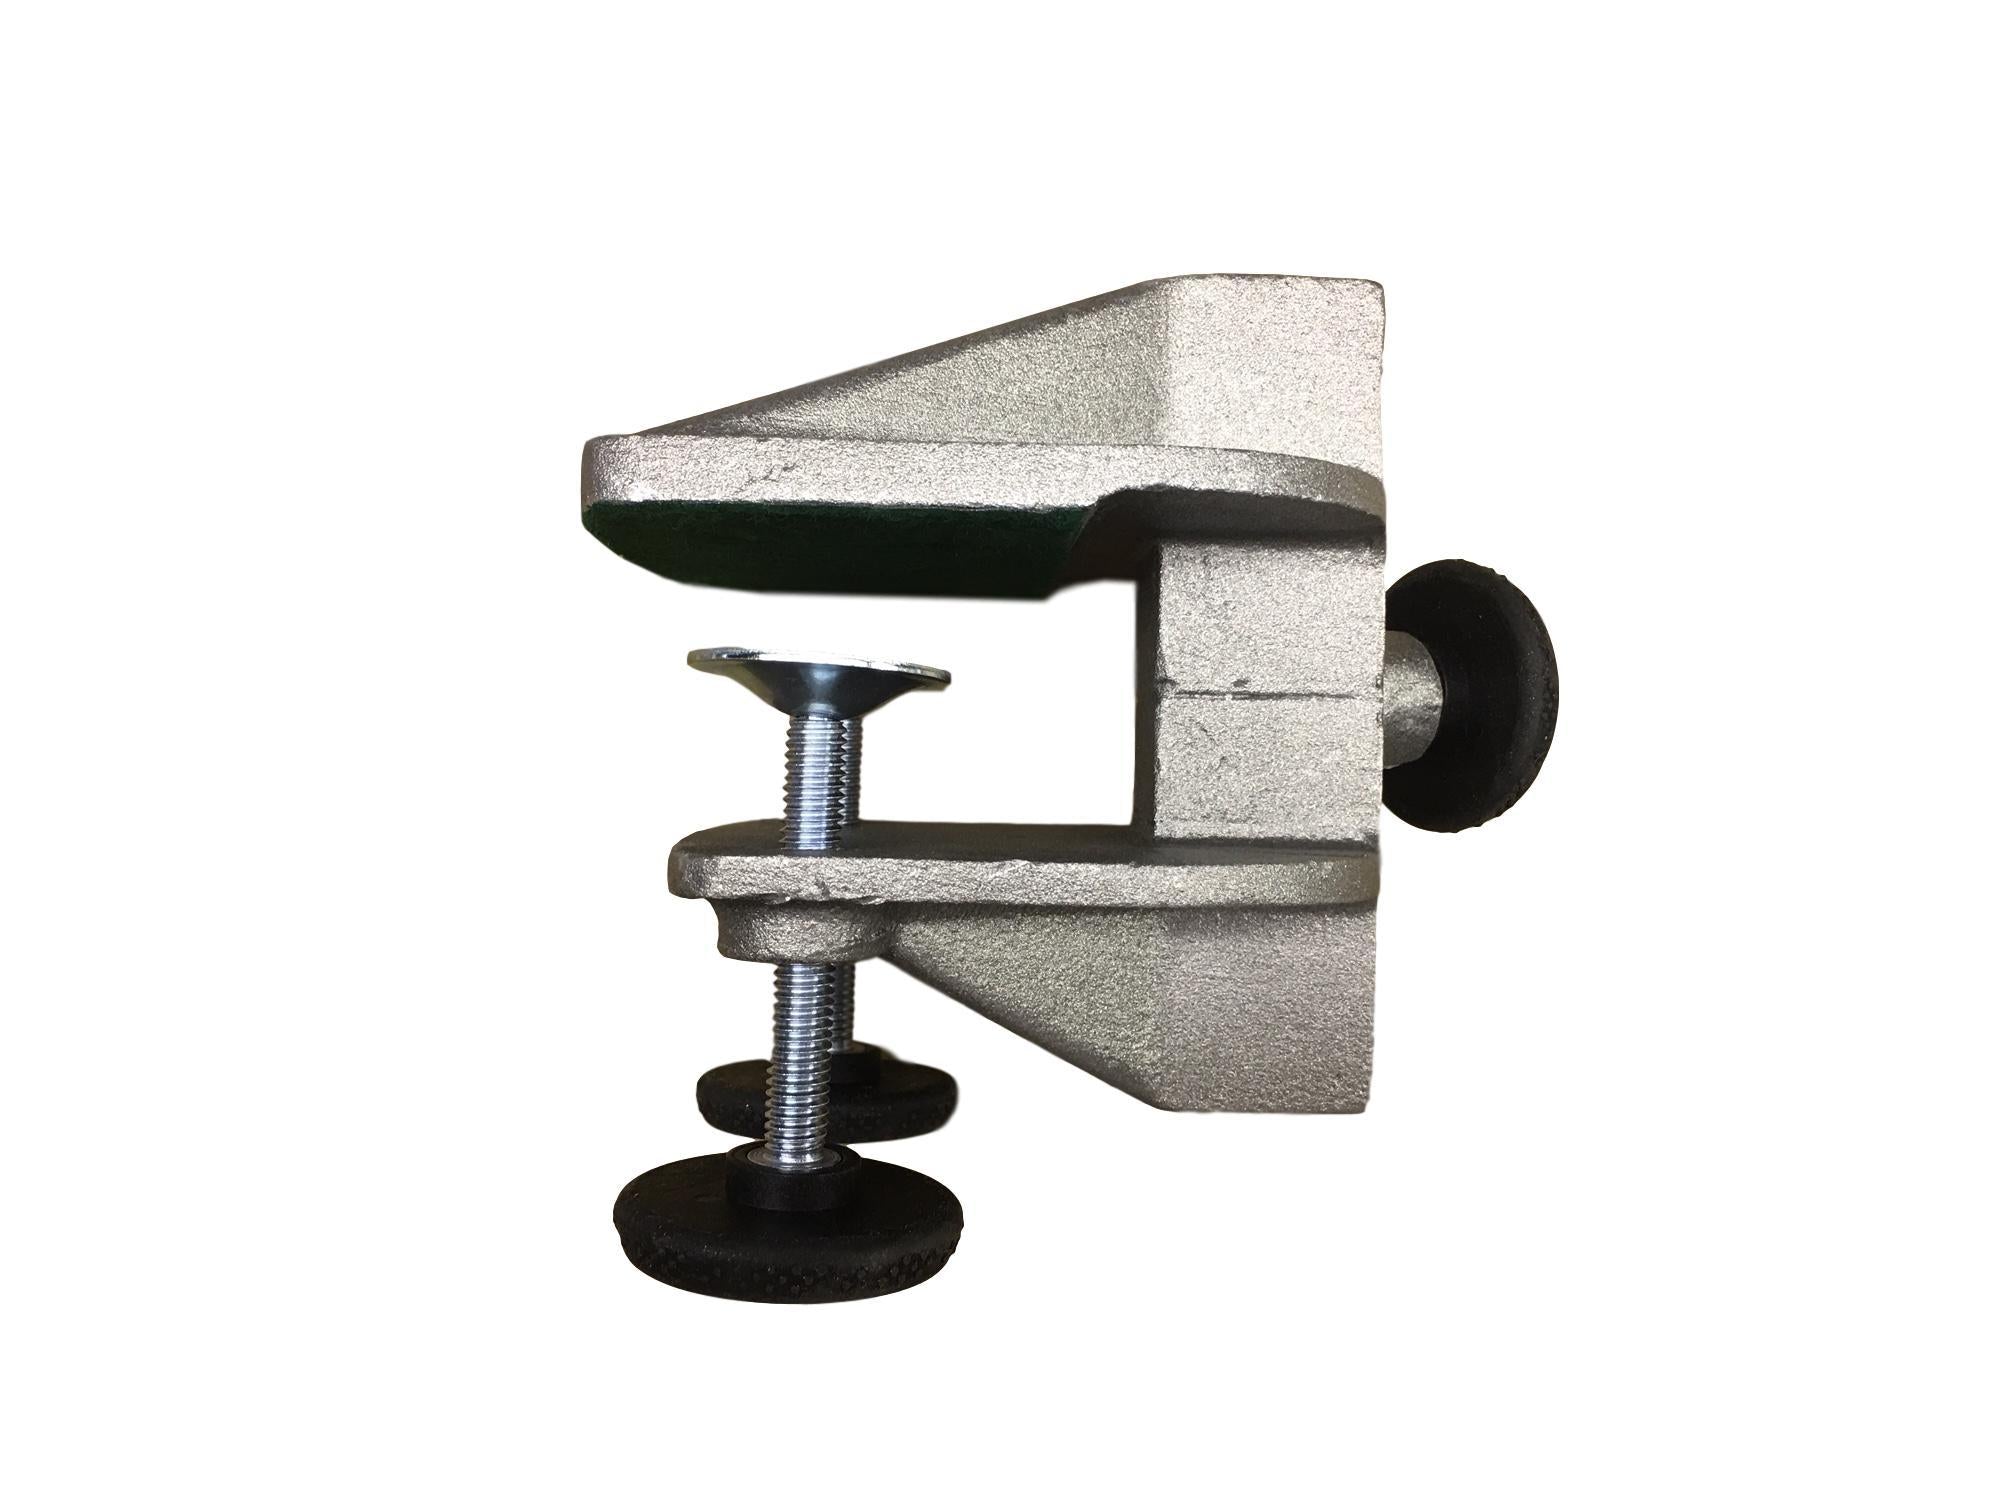 Groomer's Best Table Works Grooming Arm Clamp ONLY-Grooming Table Parts-Pet's Choice Supply